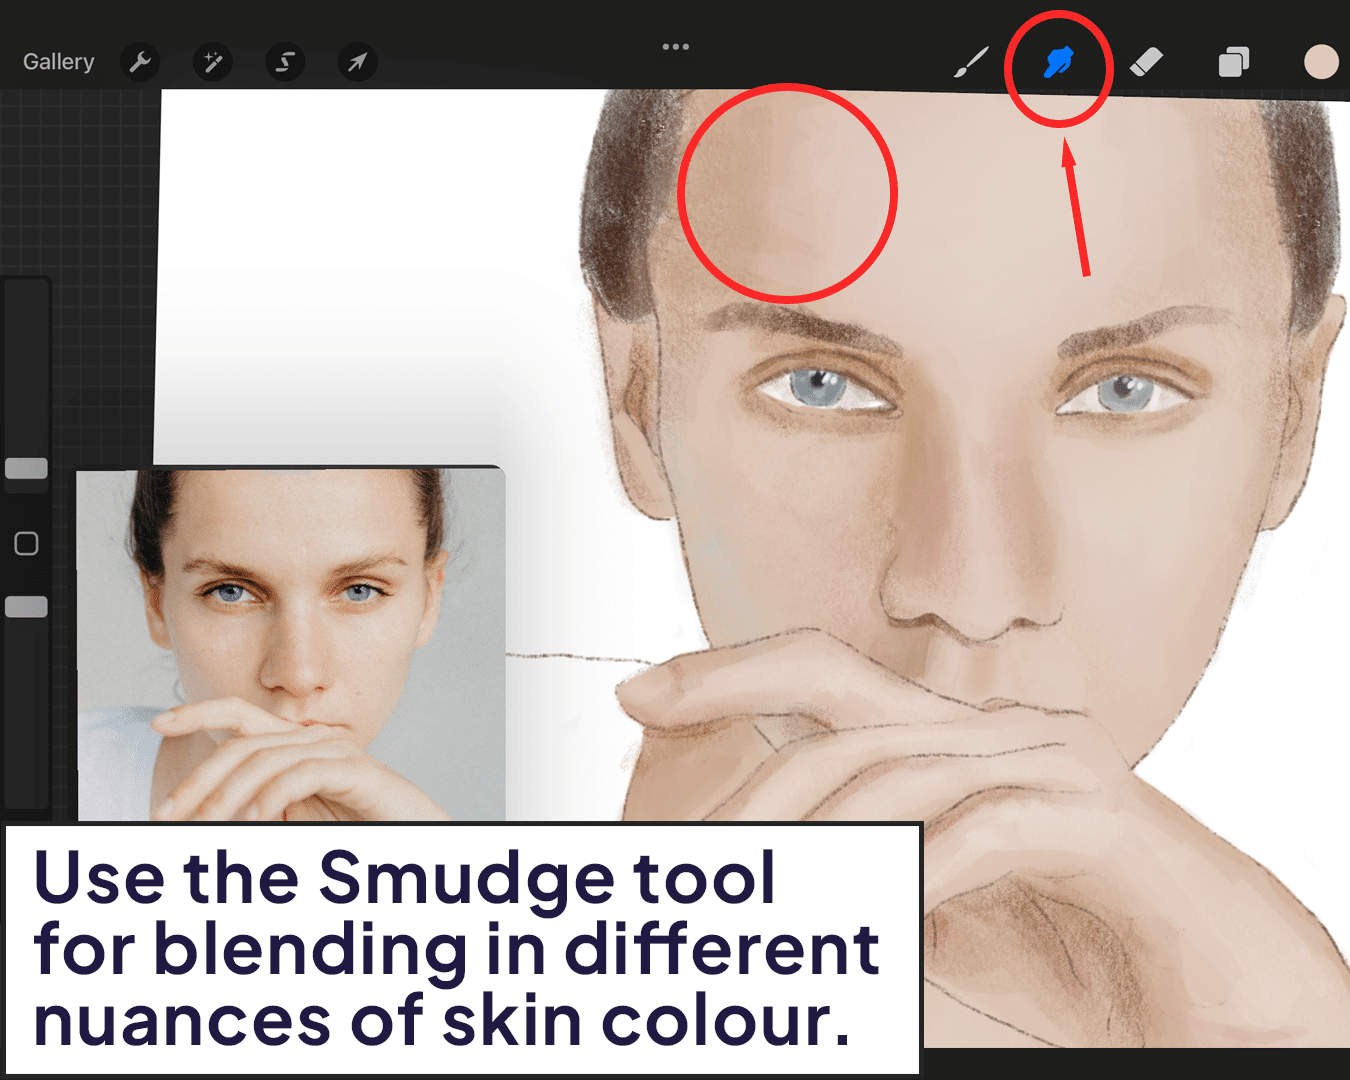 Using the Smudge tool